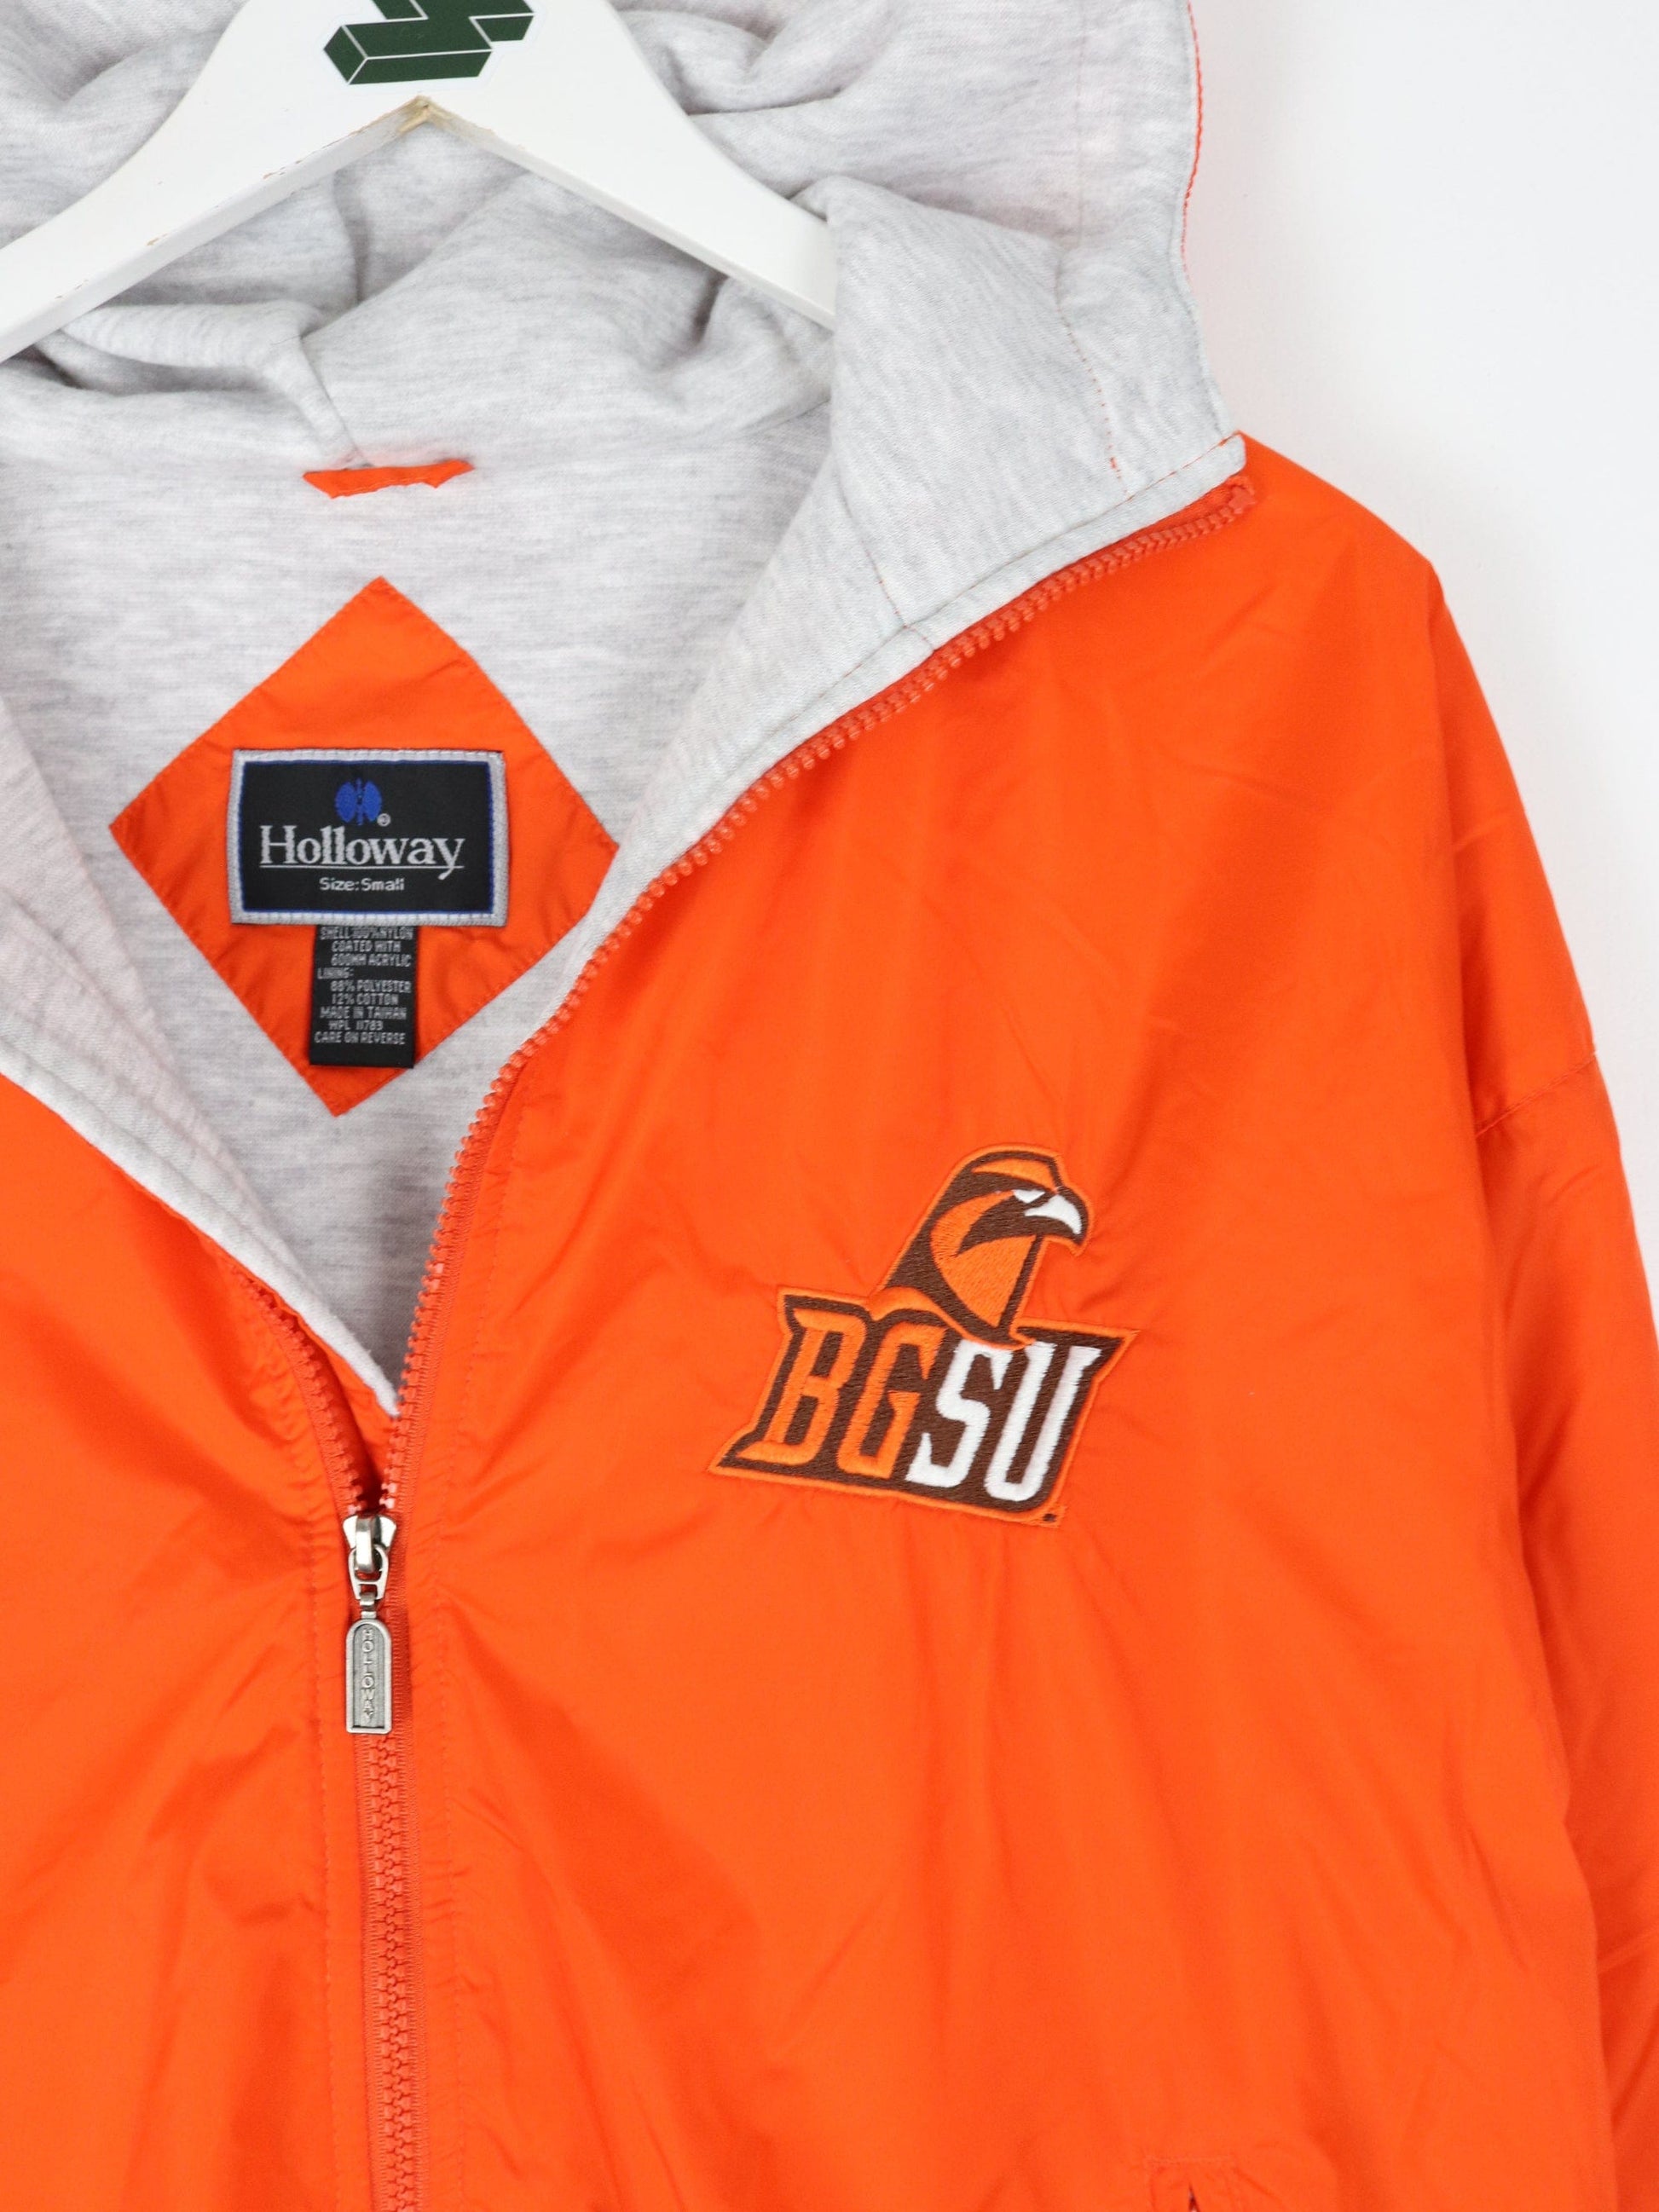 Collegiate Jackets & Coats Vintage Bowling Green State Jacket Mens Small Orange College Coat